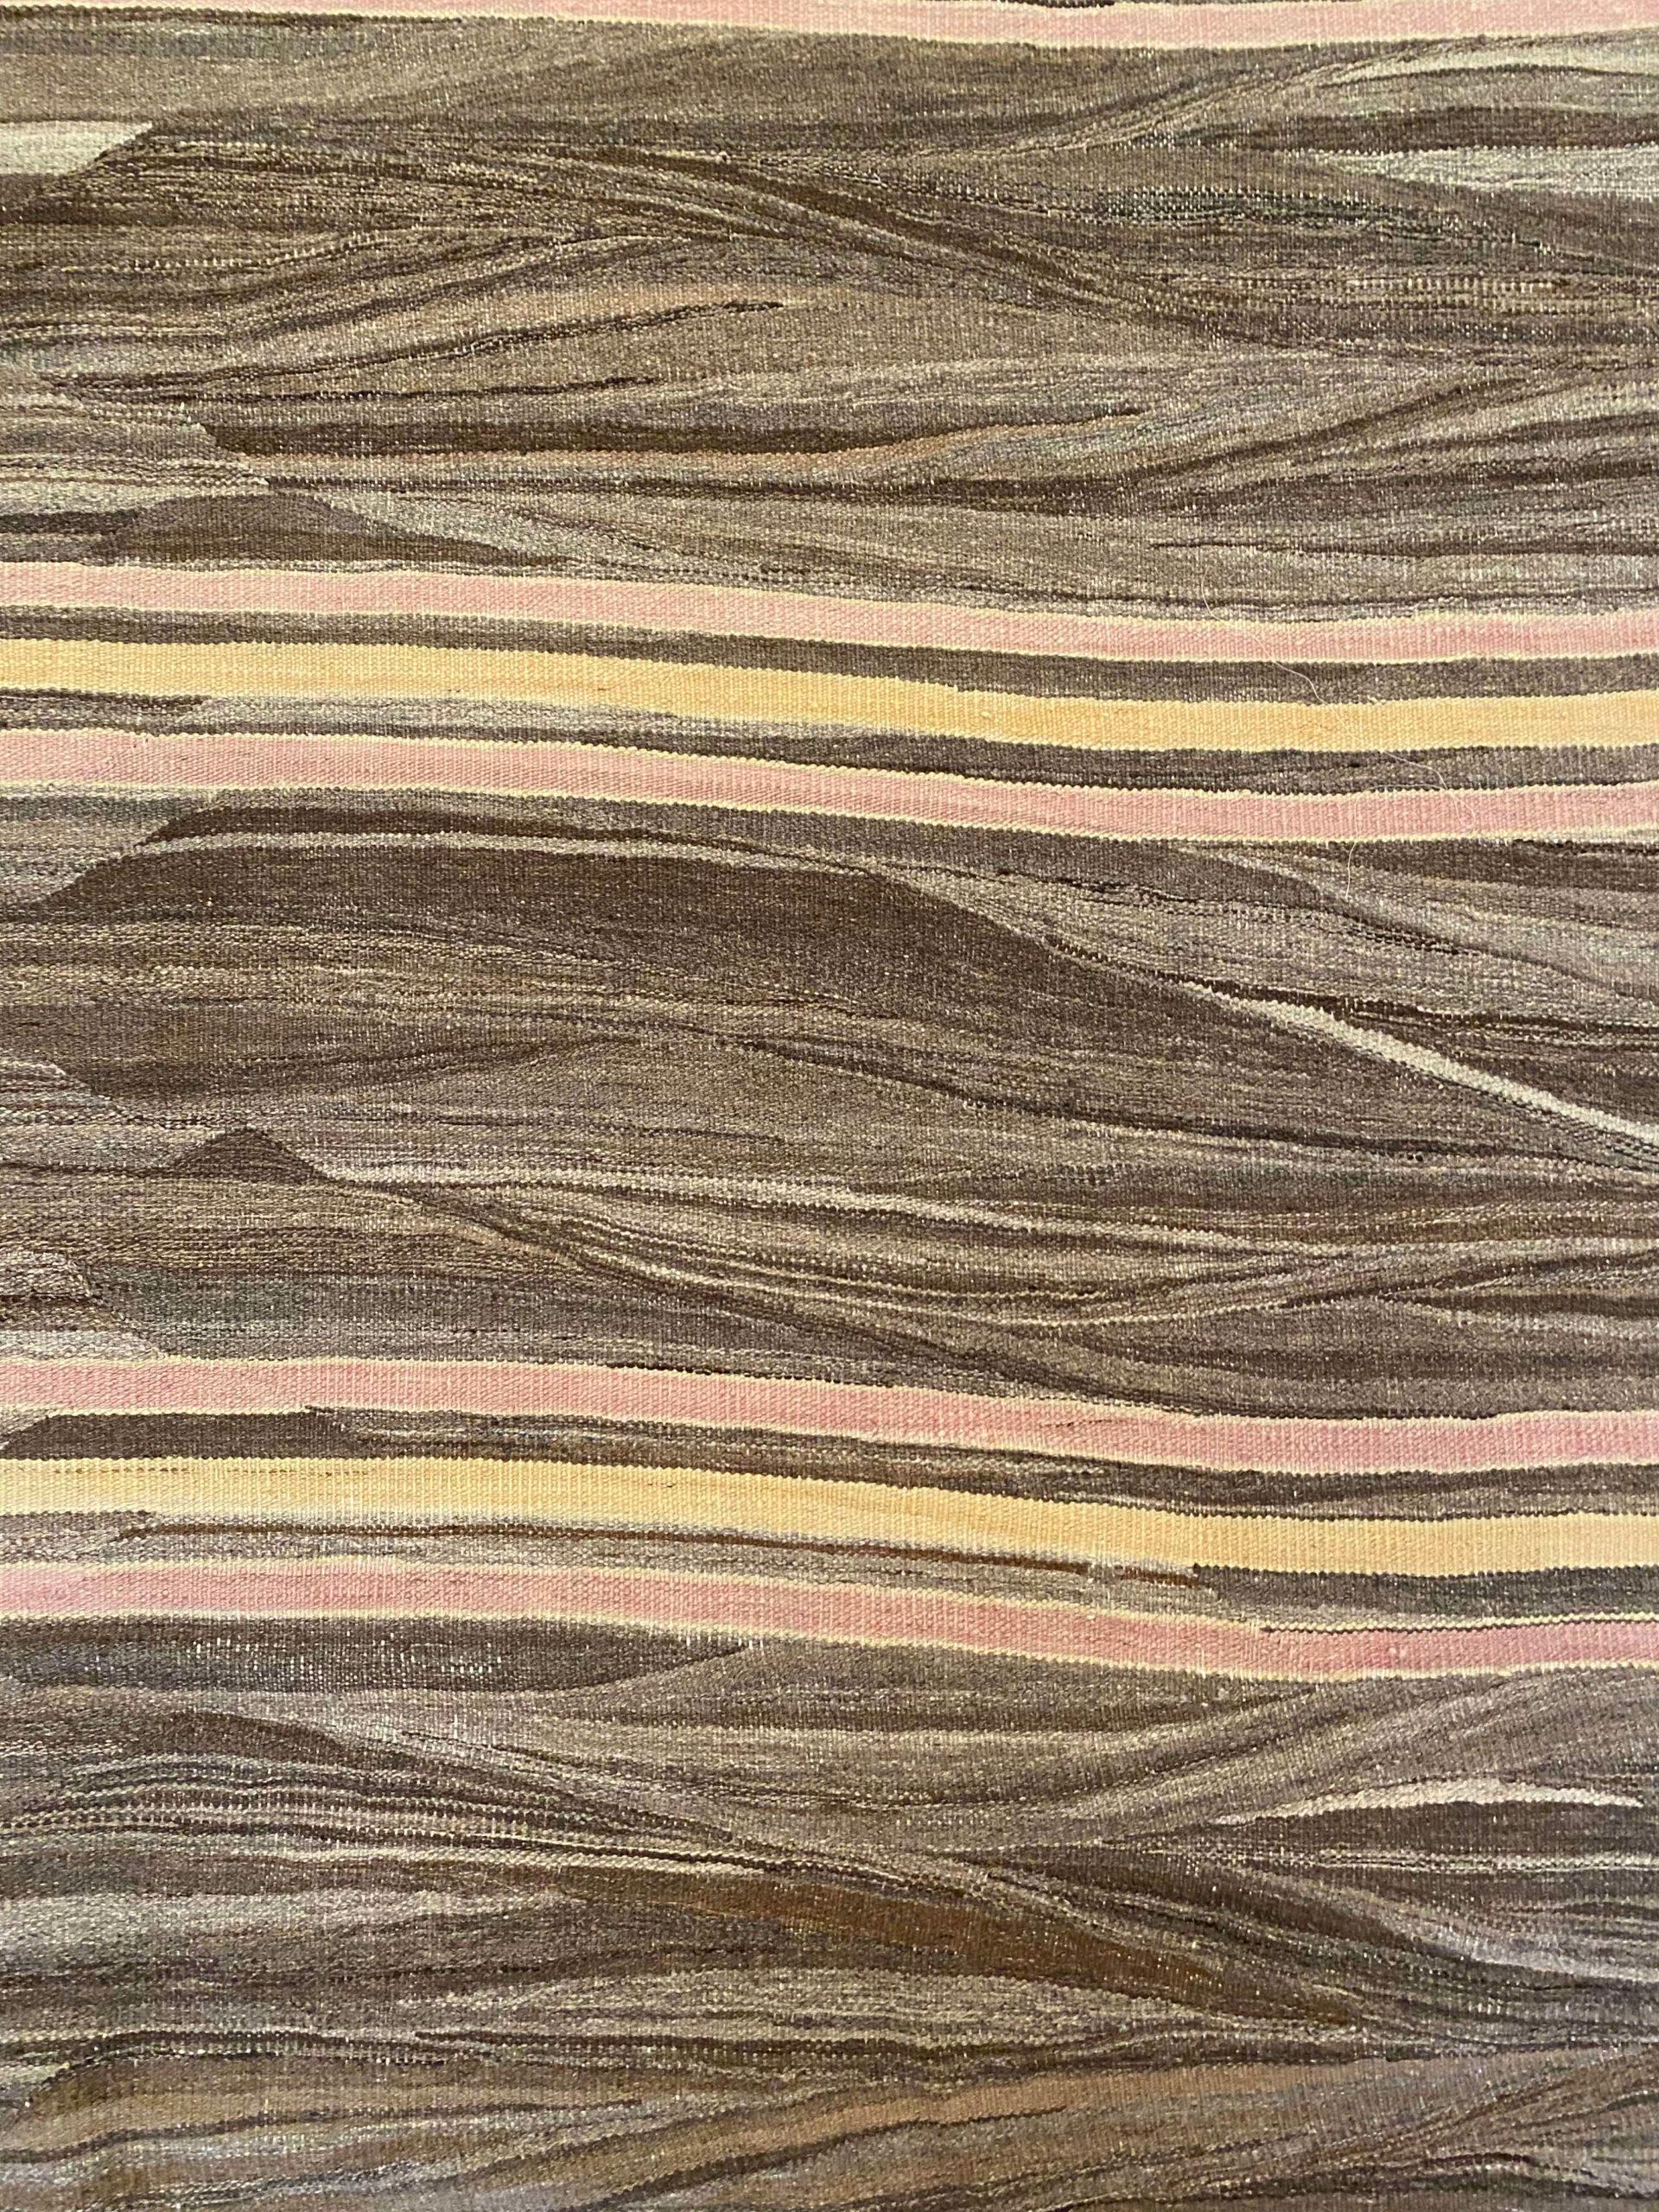 Light French Beige & Chocolate Striped Kilim In Good Condition For Sale In Sag Harbor, NY